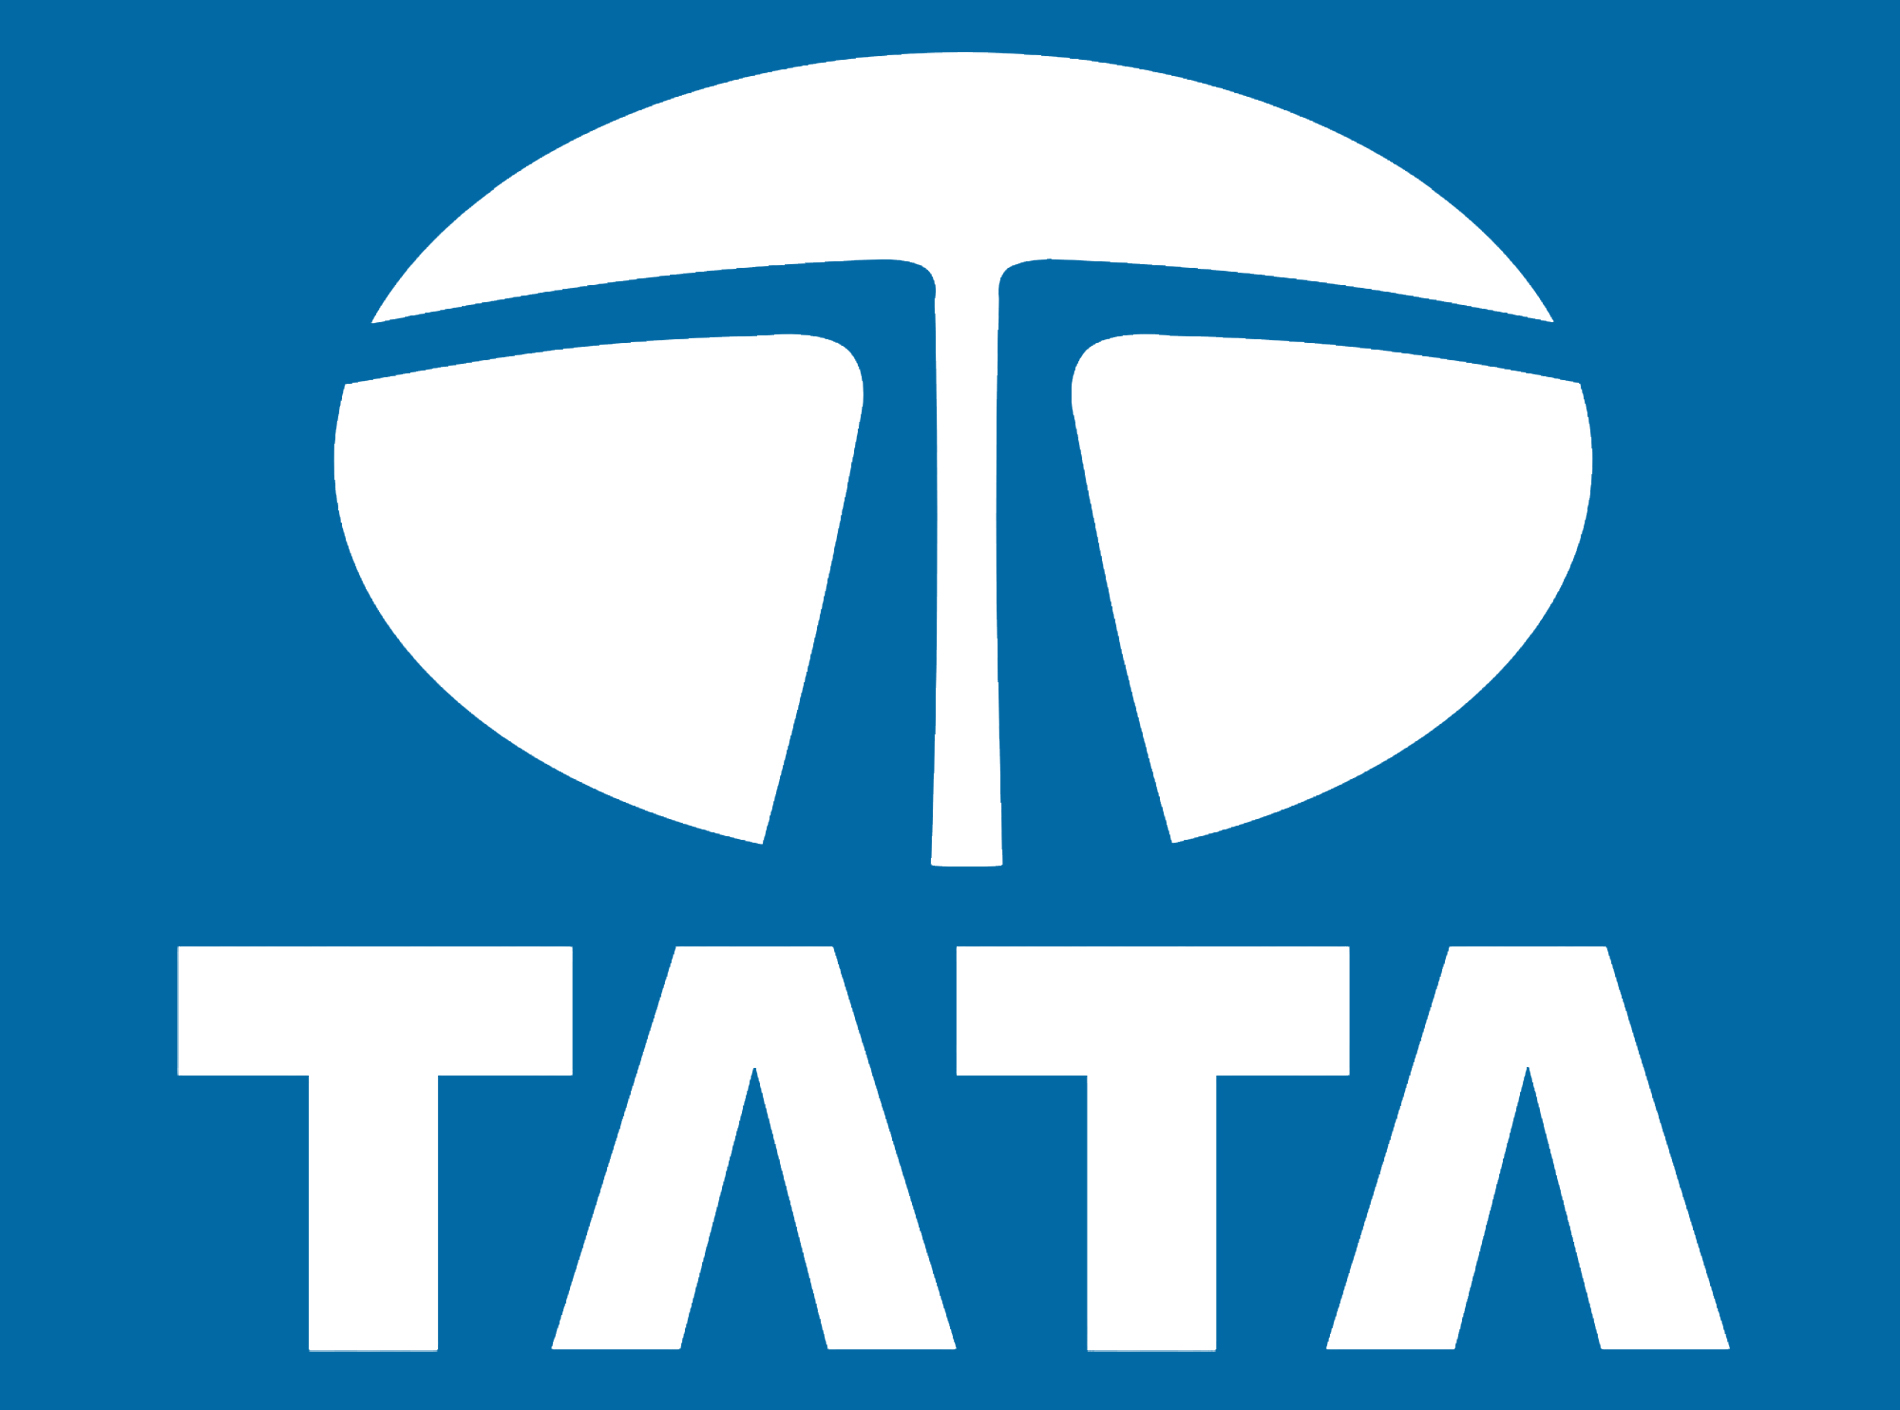 Tata Motors wins compensation of Rs 766 crore for investment in Singur plant